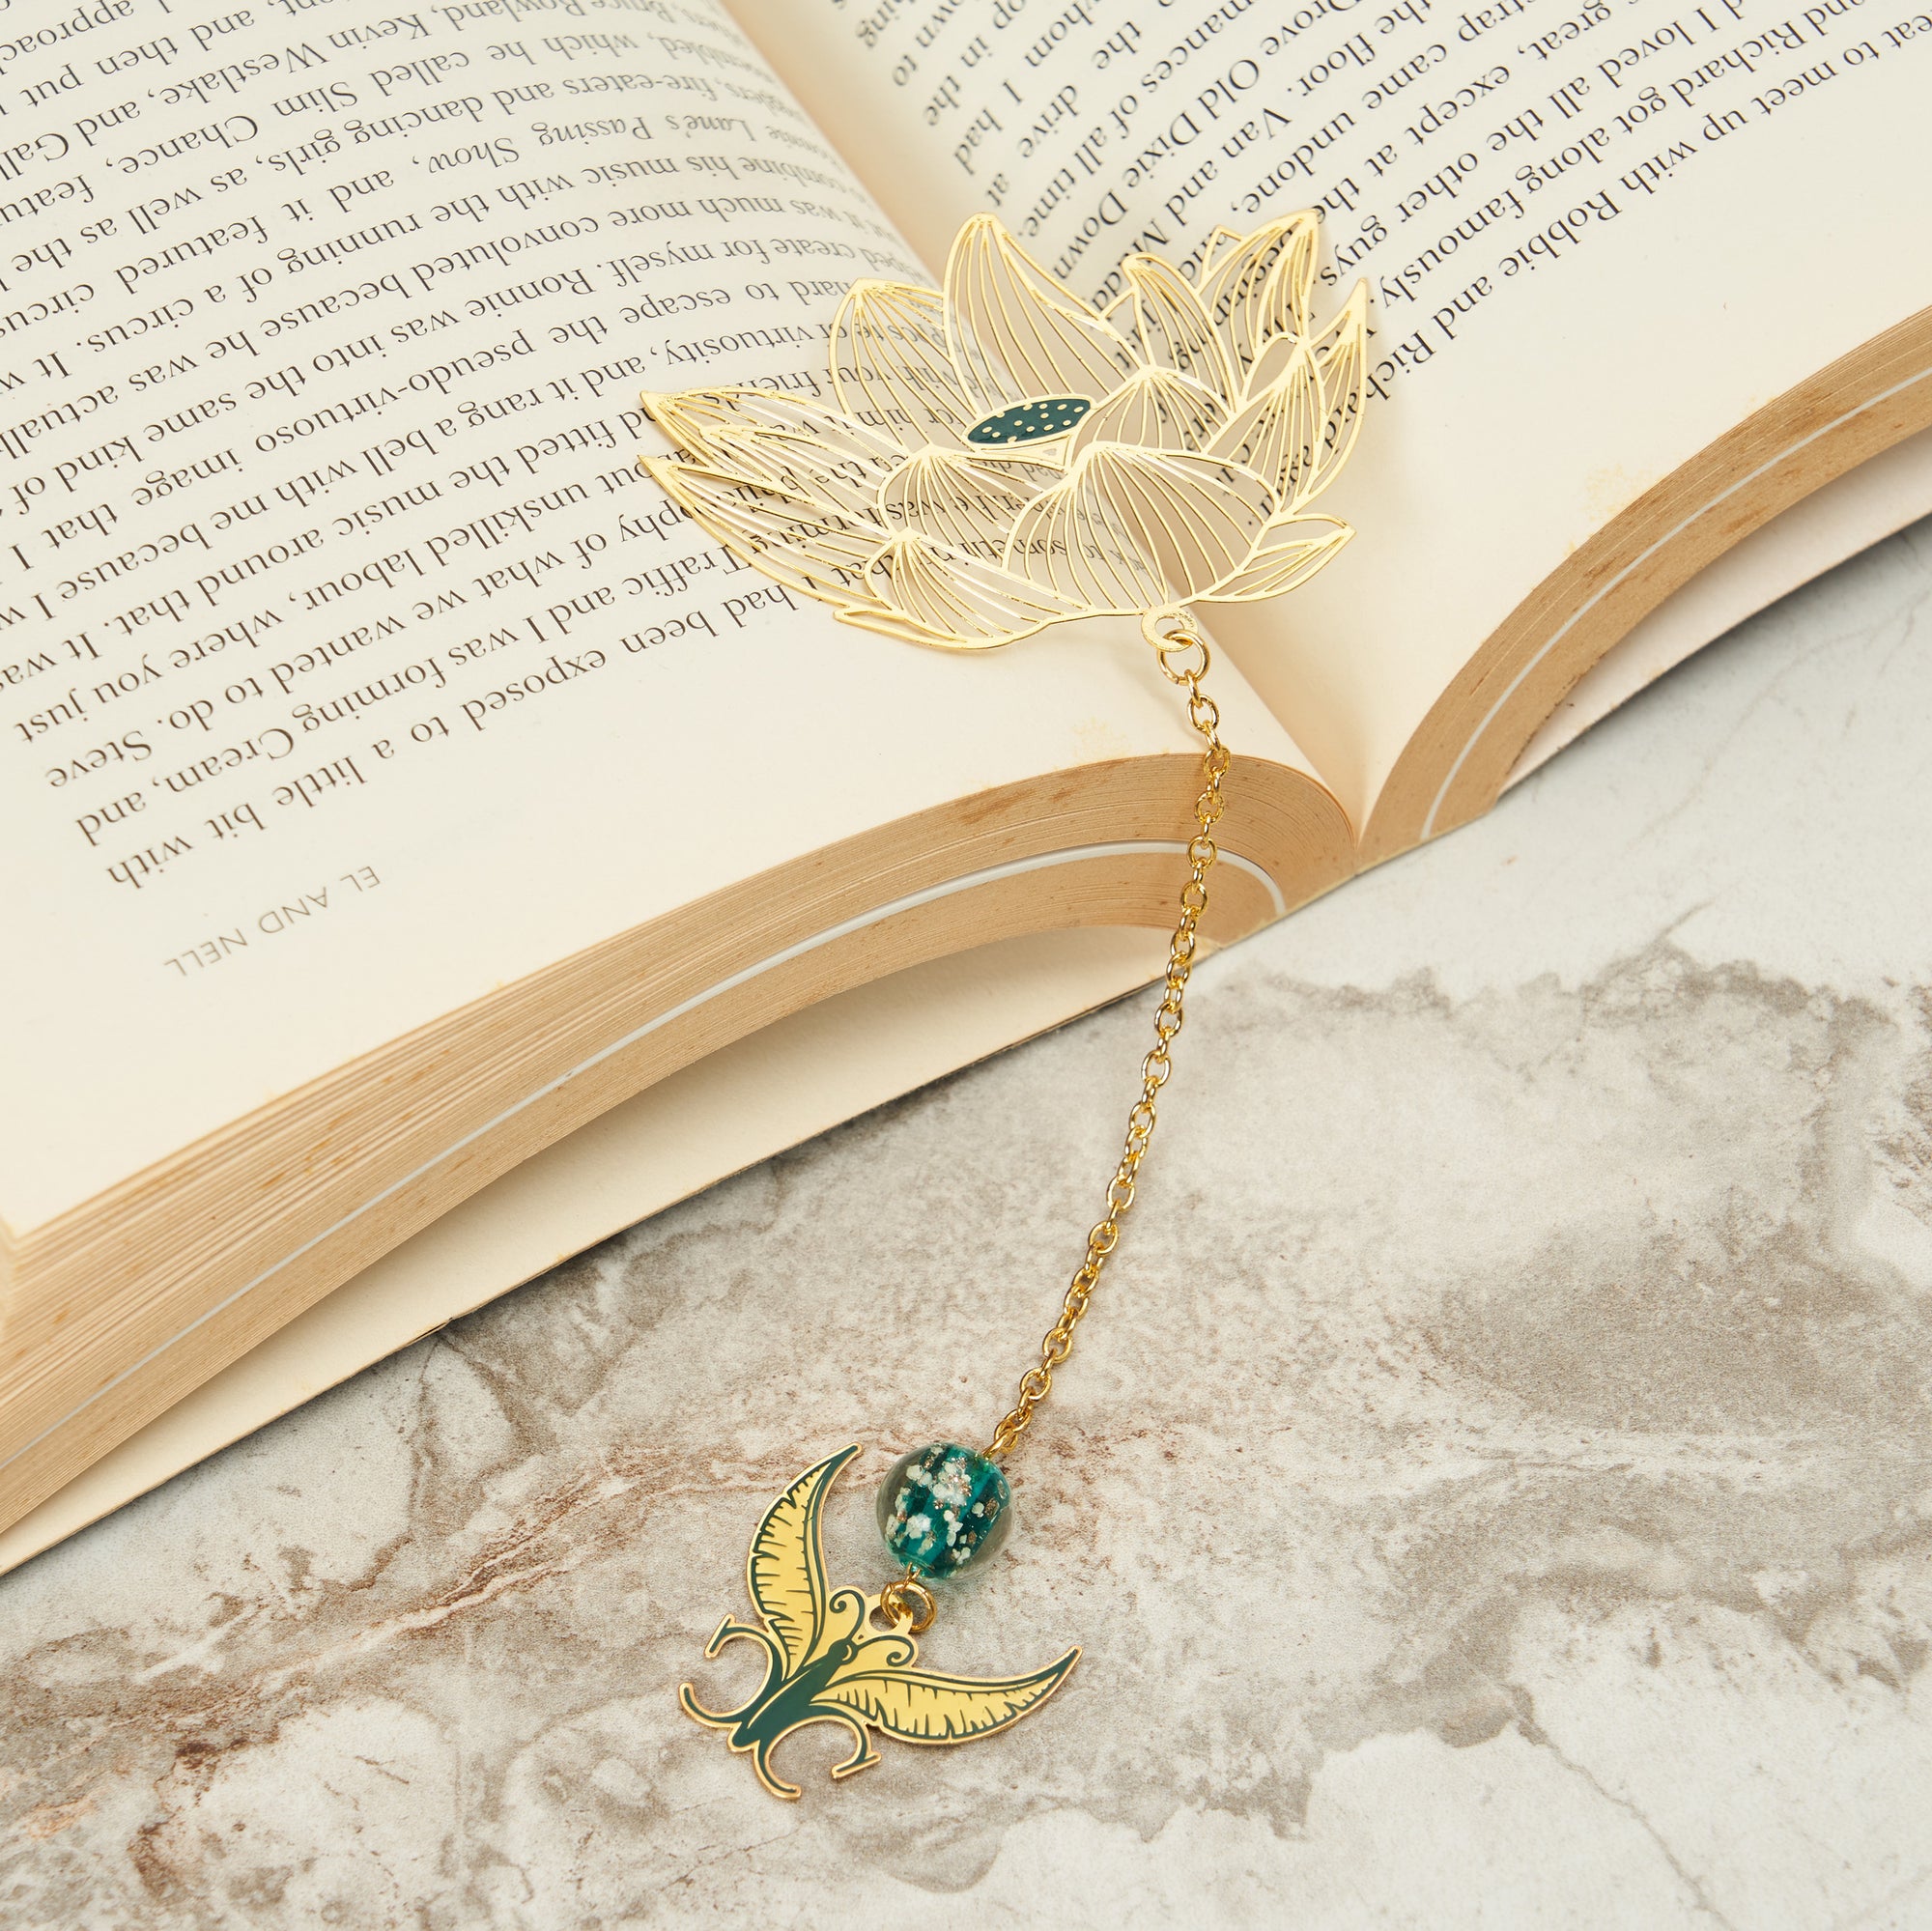 ComfyCozy Metal Flower Butterfly Bookmark